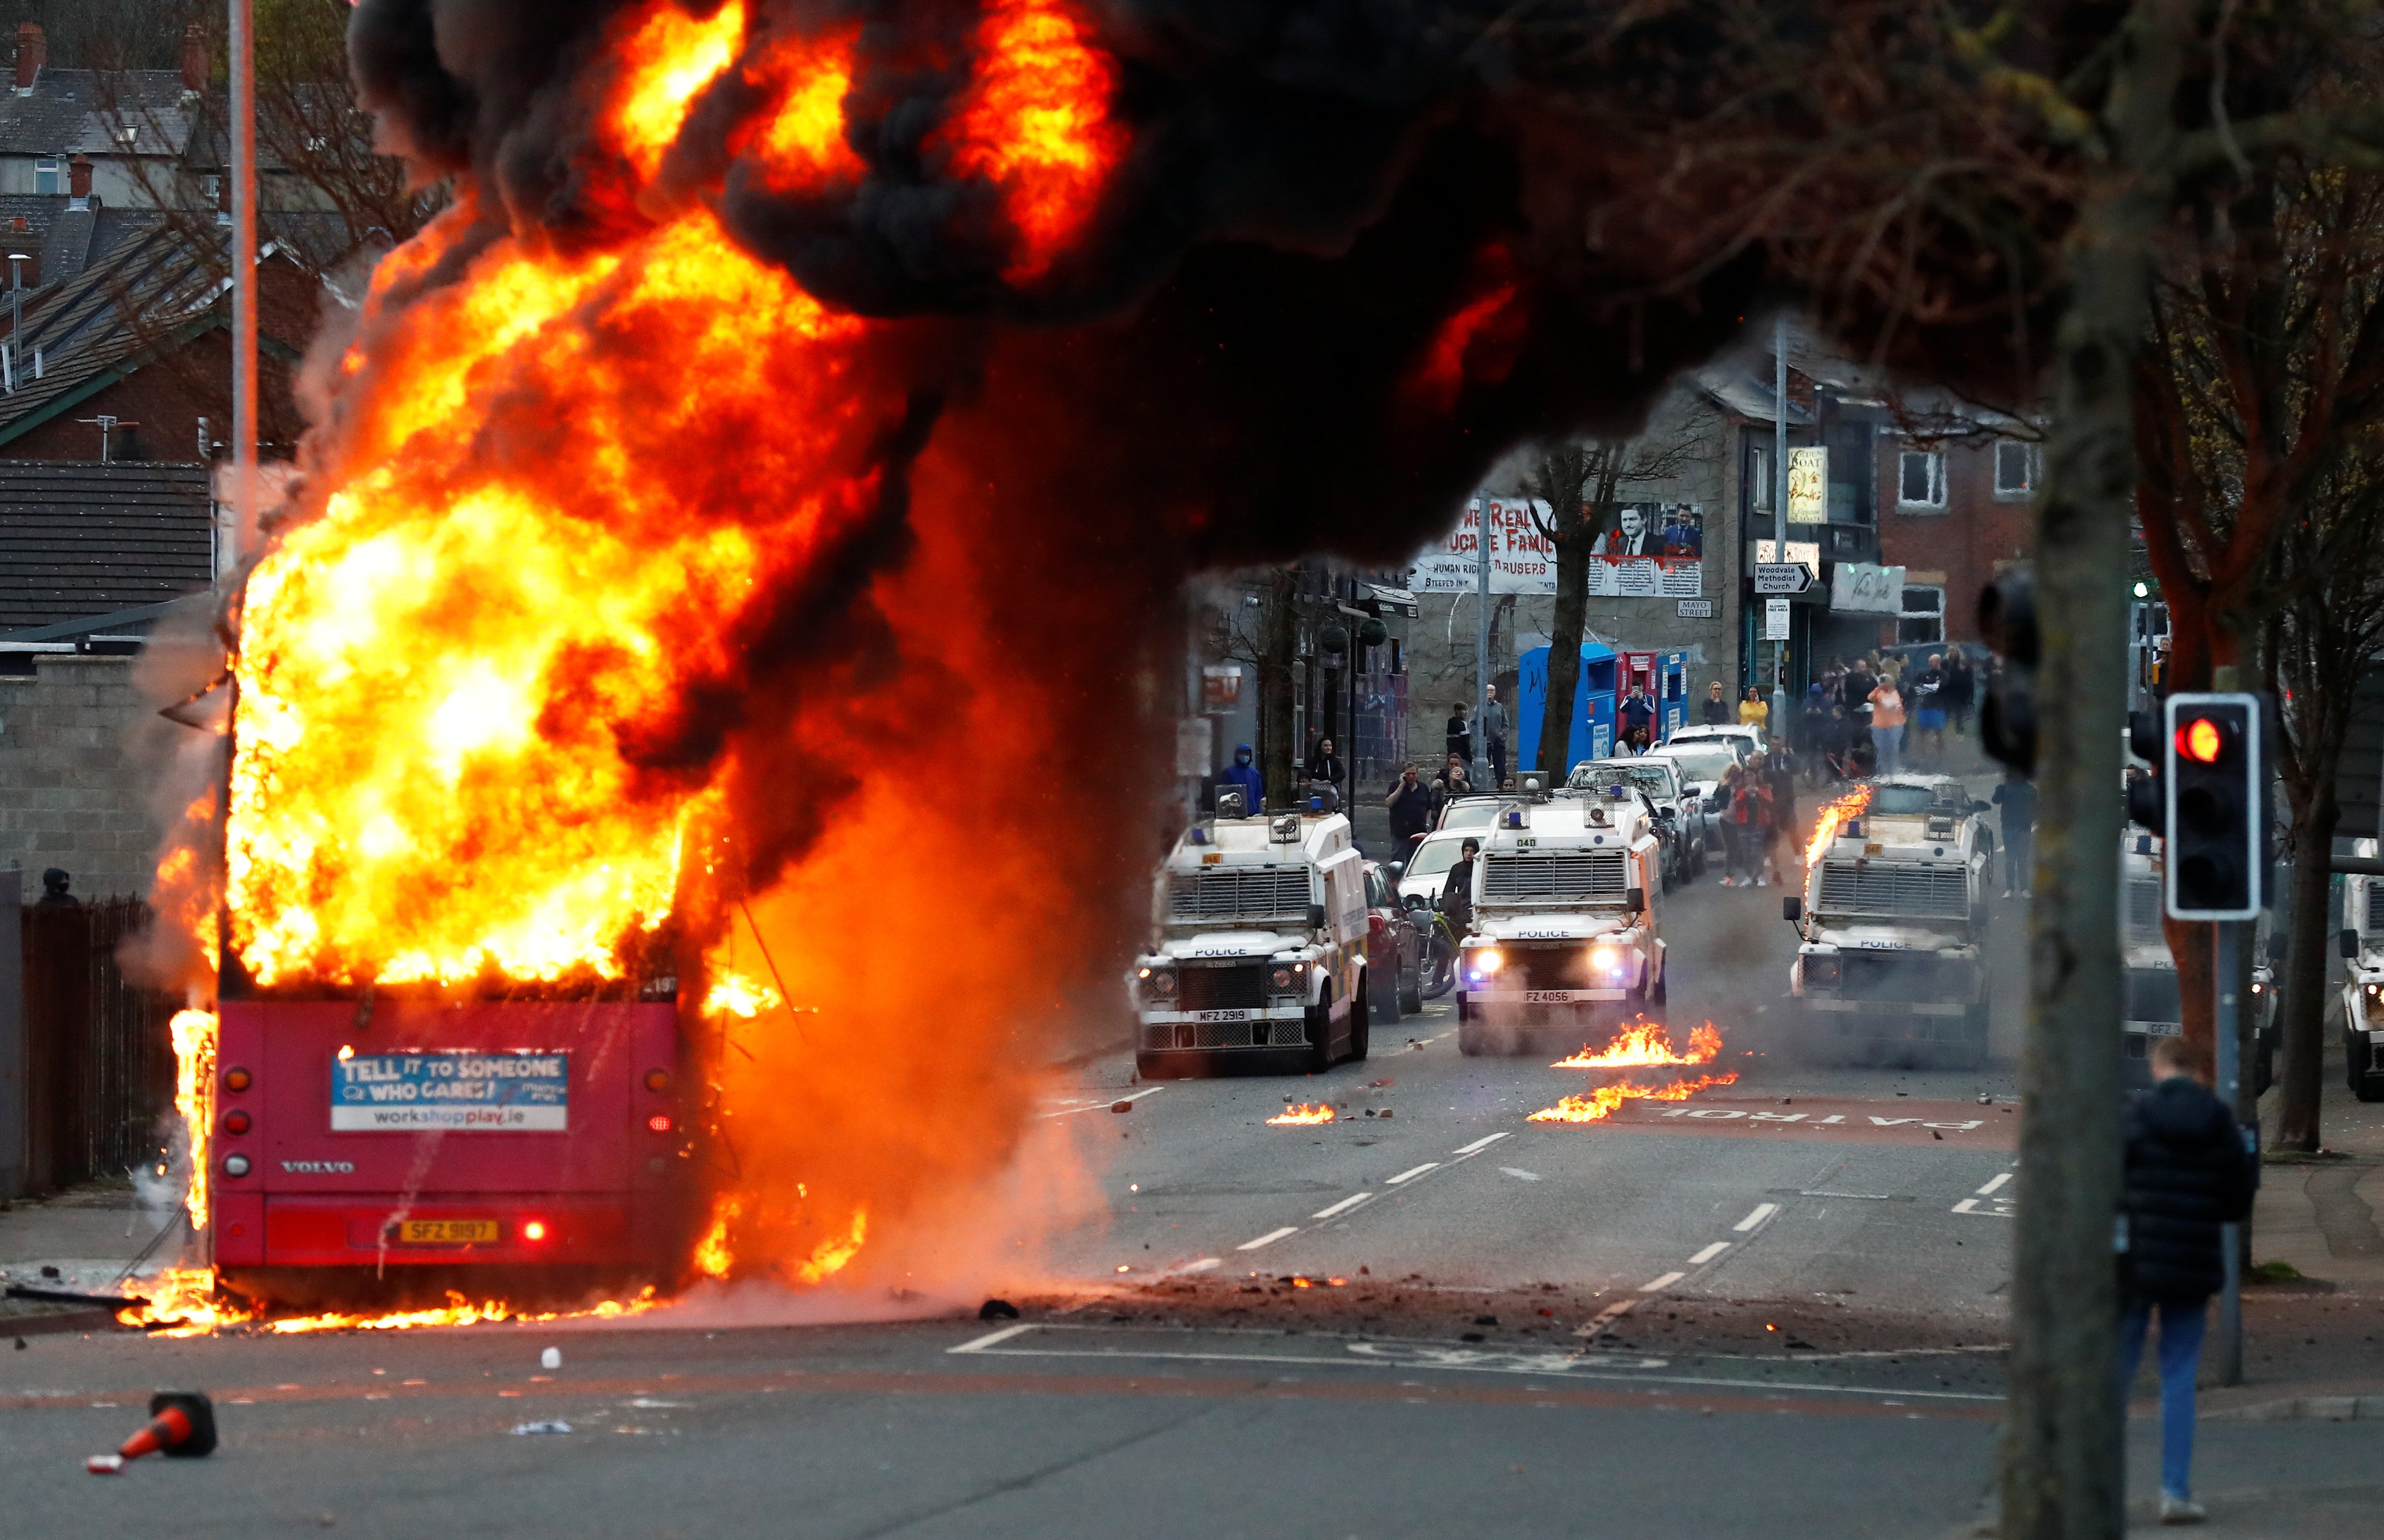 A hijacked bus burns on the Shankill Road as protests continue in Belfast on Wednesday evening